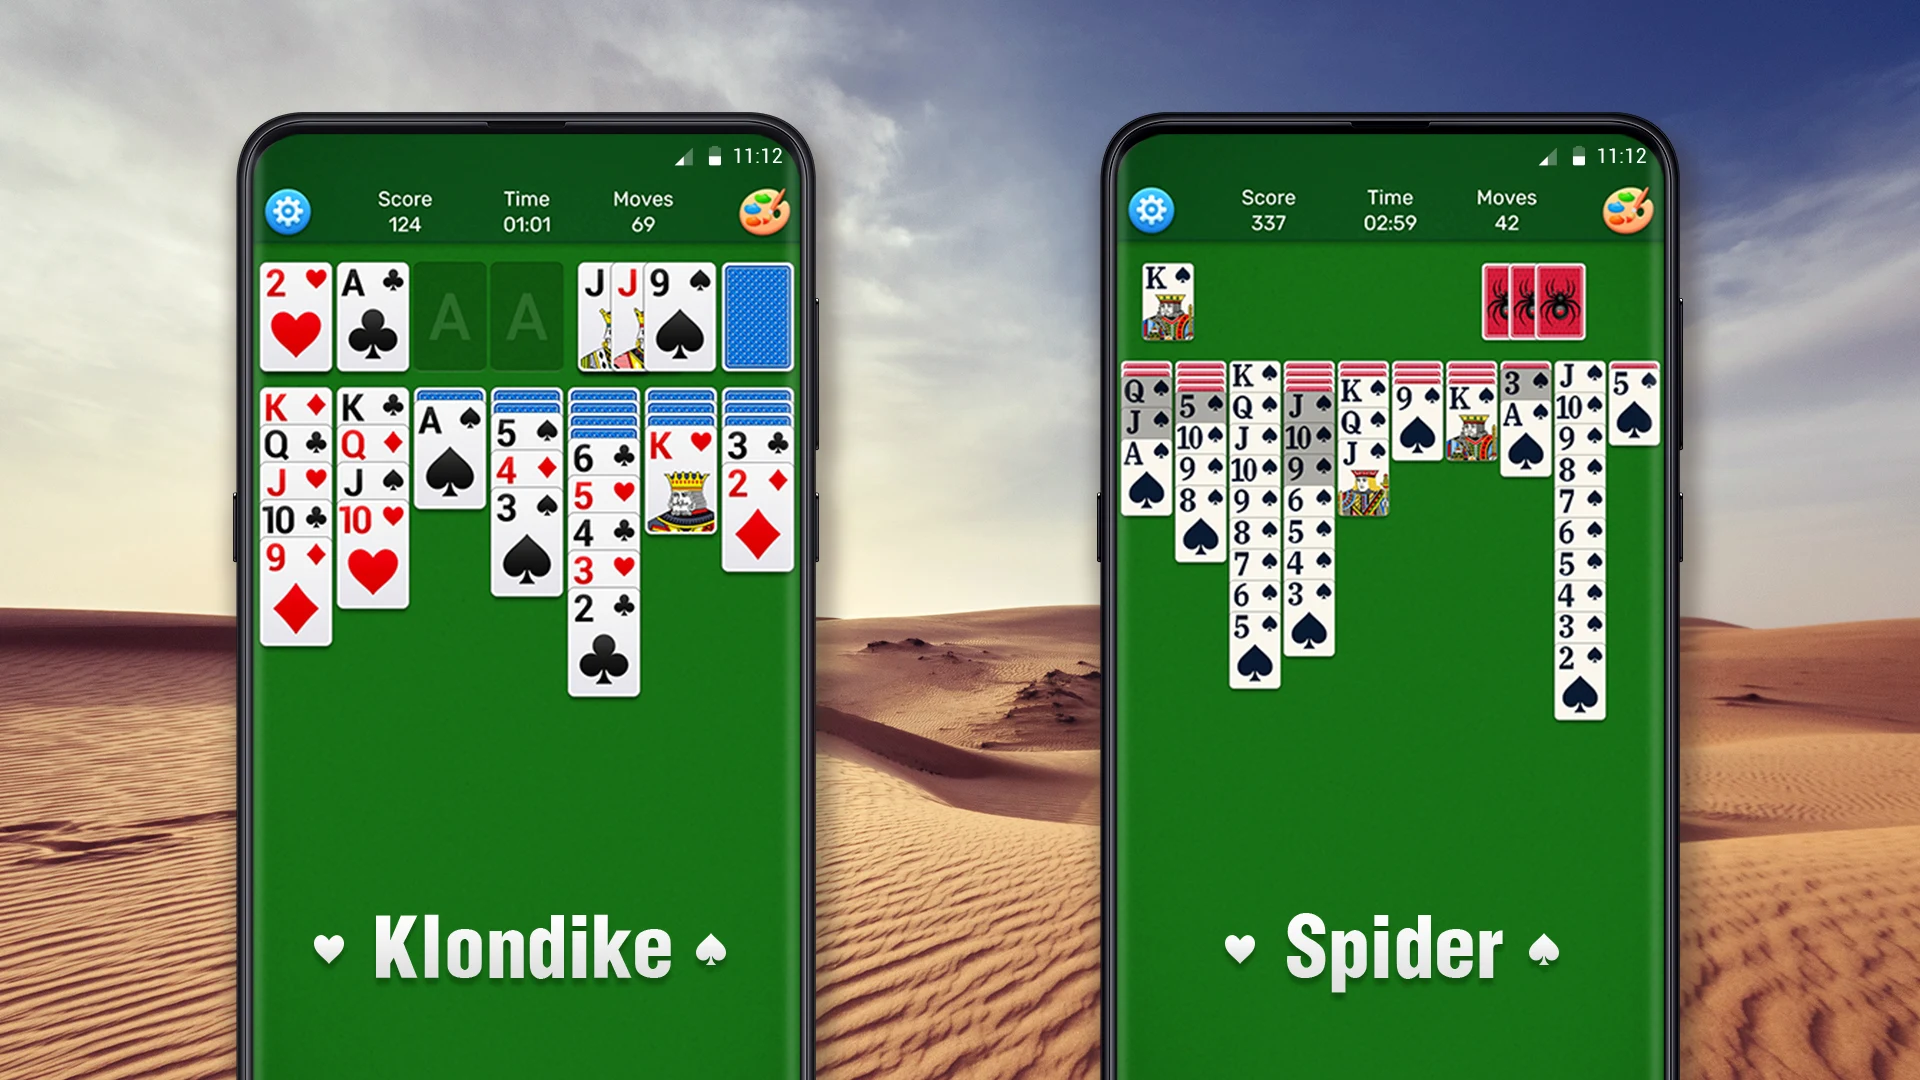 Play Microsoft Pyramid Solitaire 🕹️ Game for Free at !